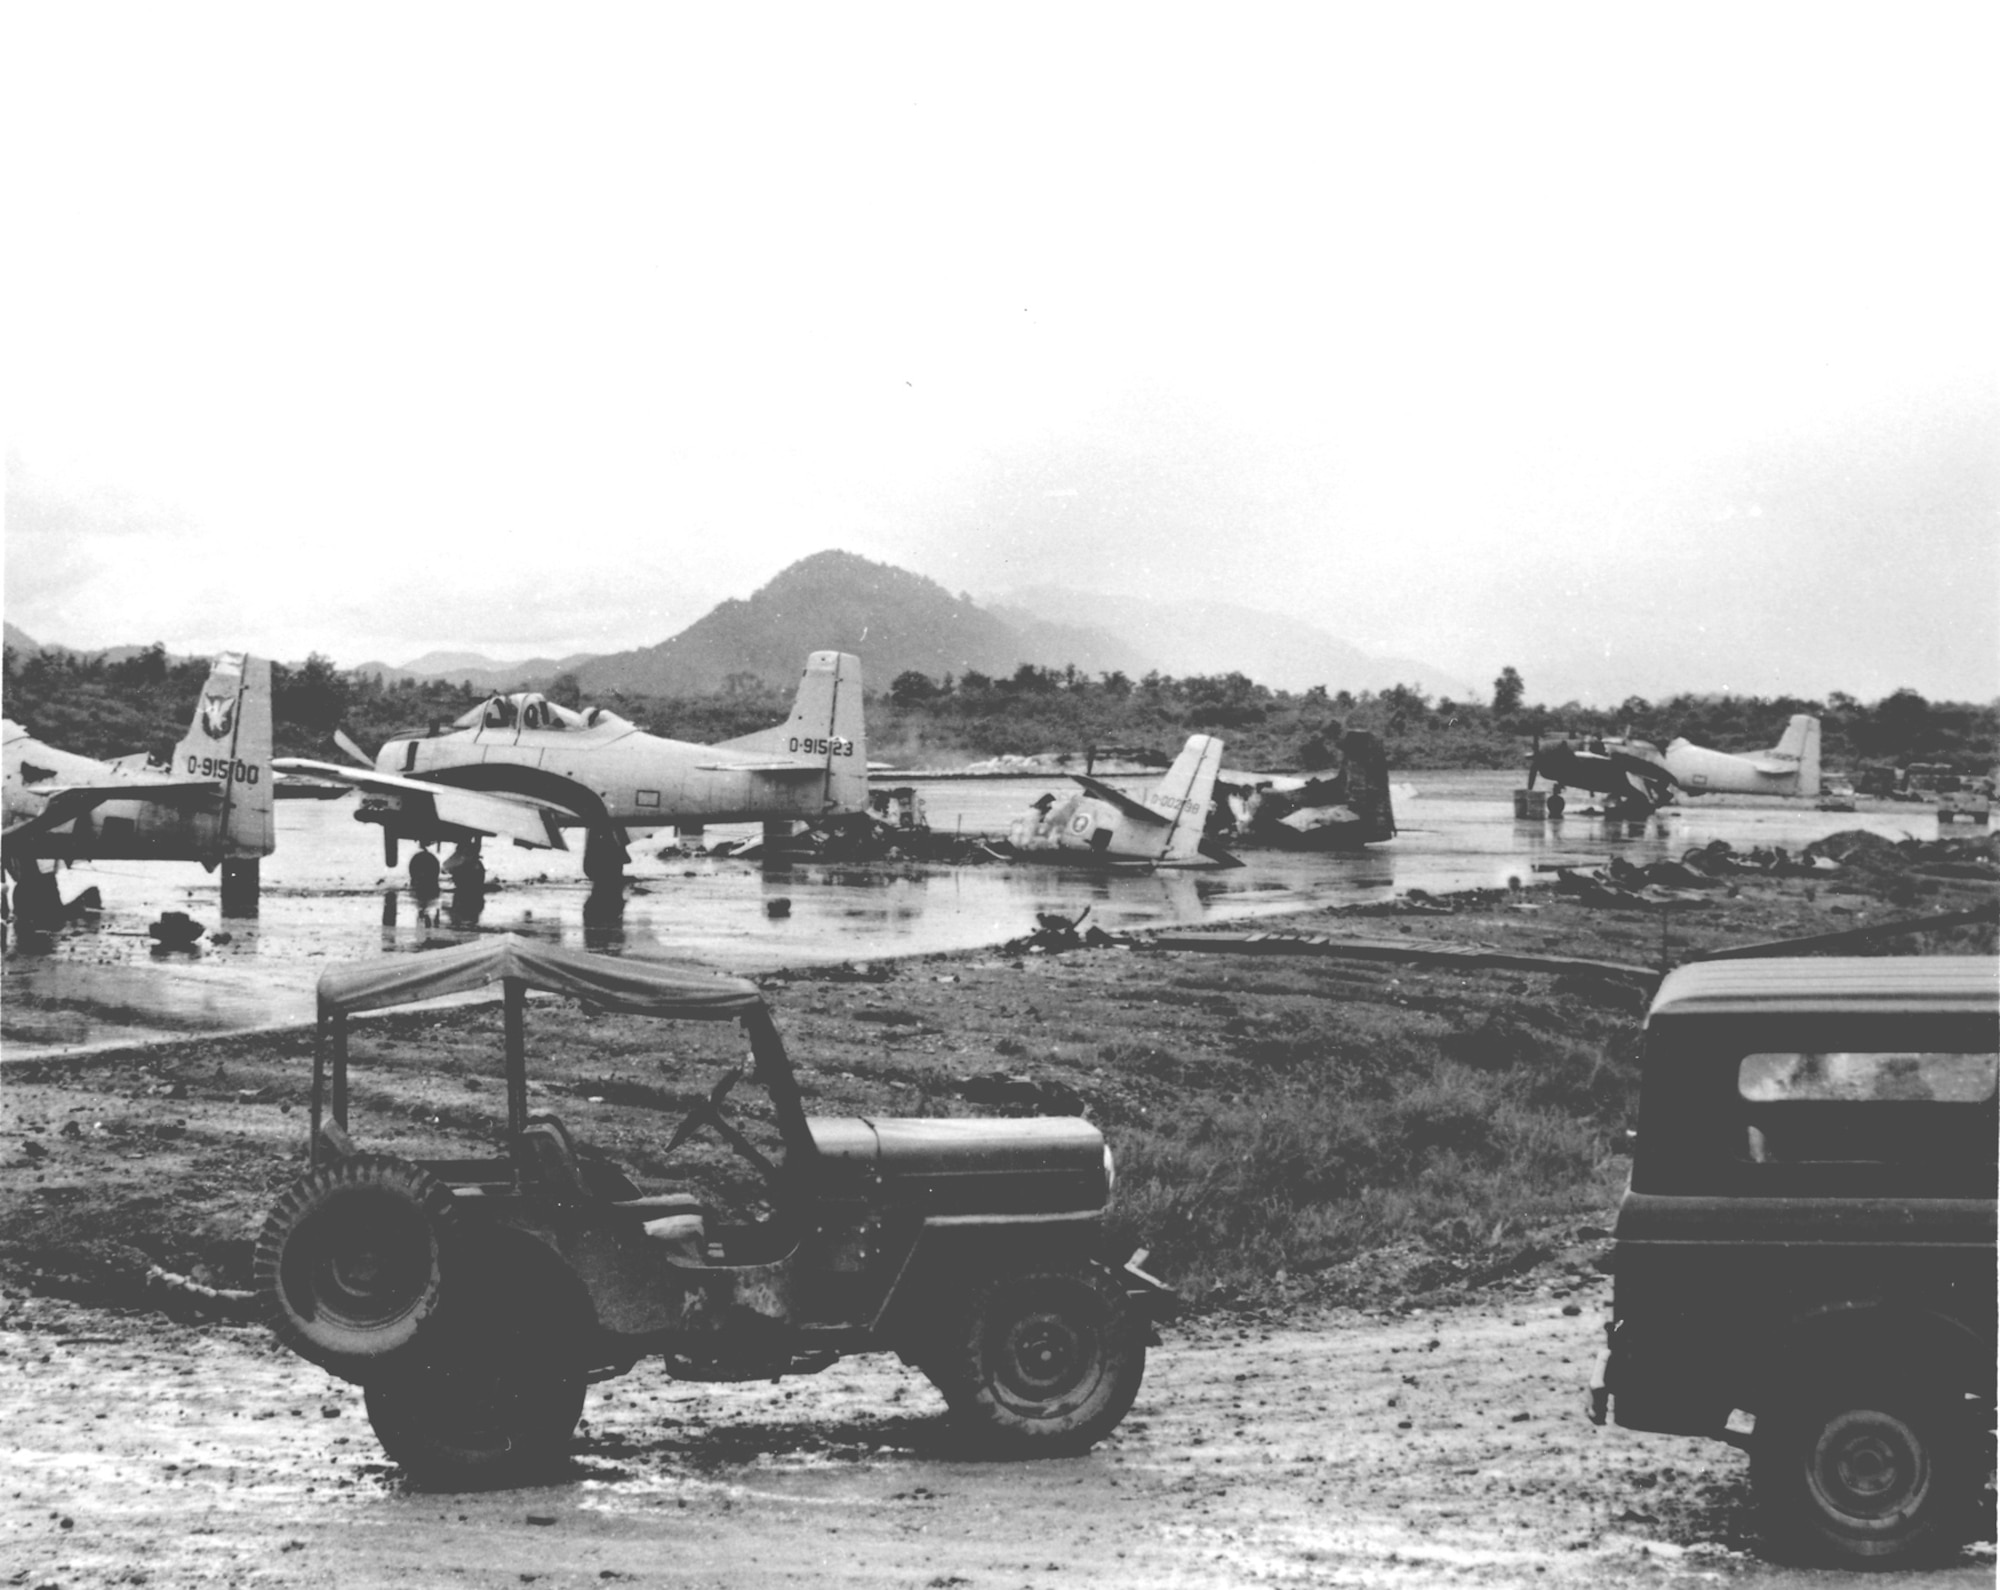 Damage caused by a communist ground attack on Luang Prabang airfield, Laos, 1967. (U.S. Air Force photo).